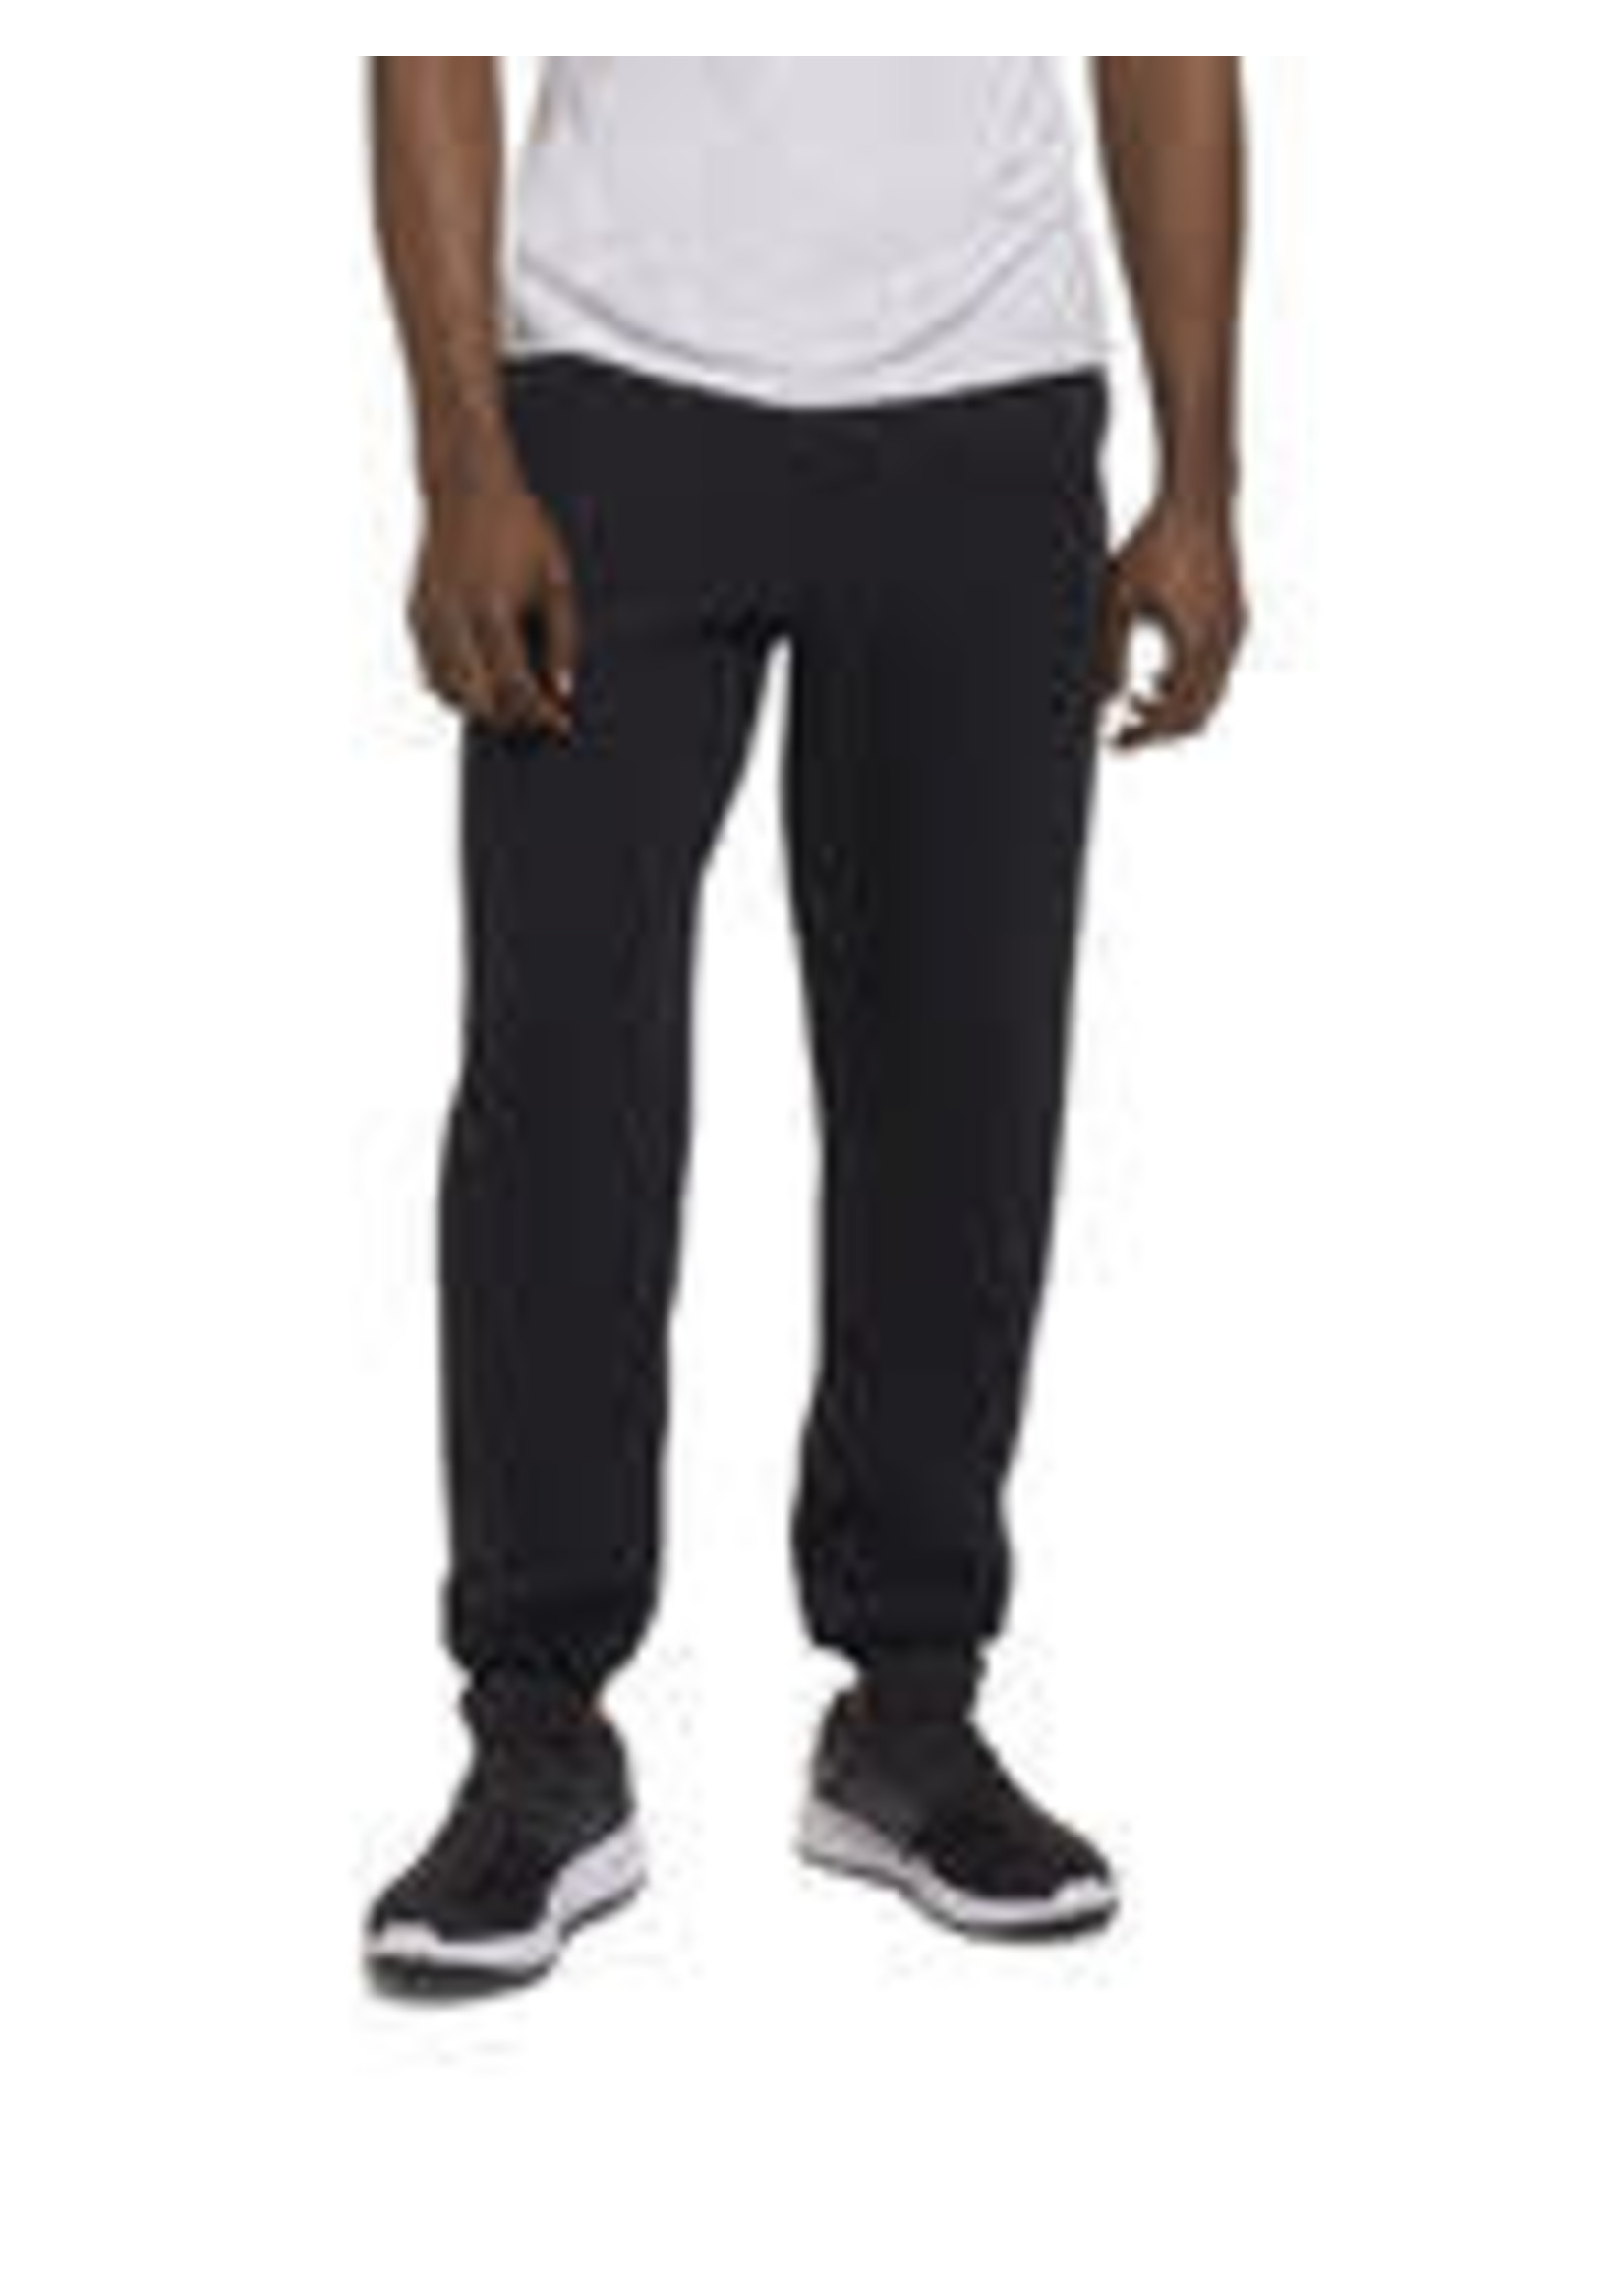 RUSSELL RUSSELL SWEAT PANTS ELASTIC BOTTOM W/ POCKETS